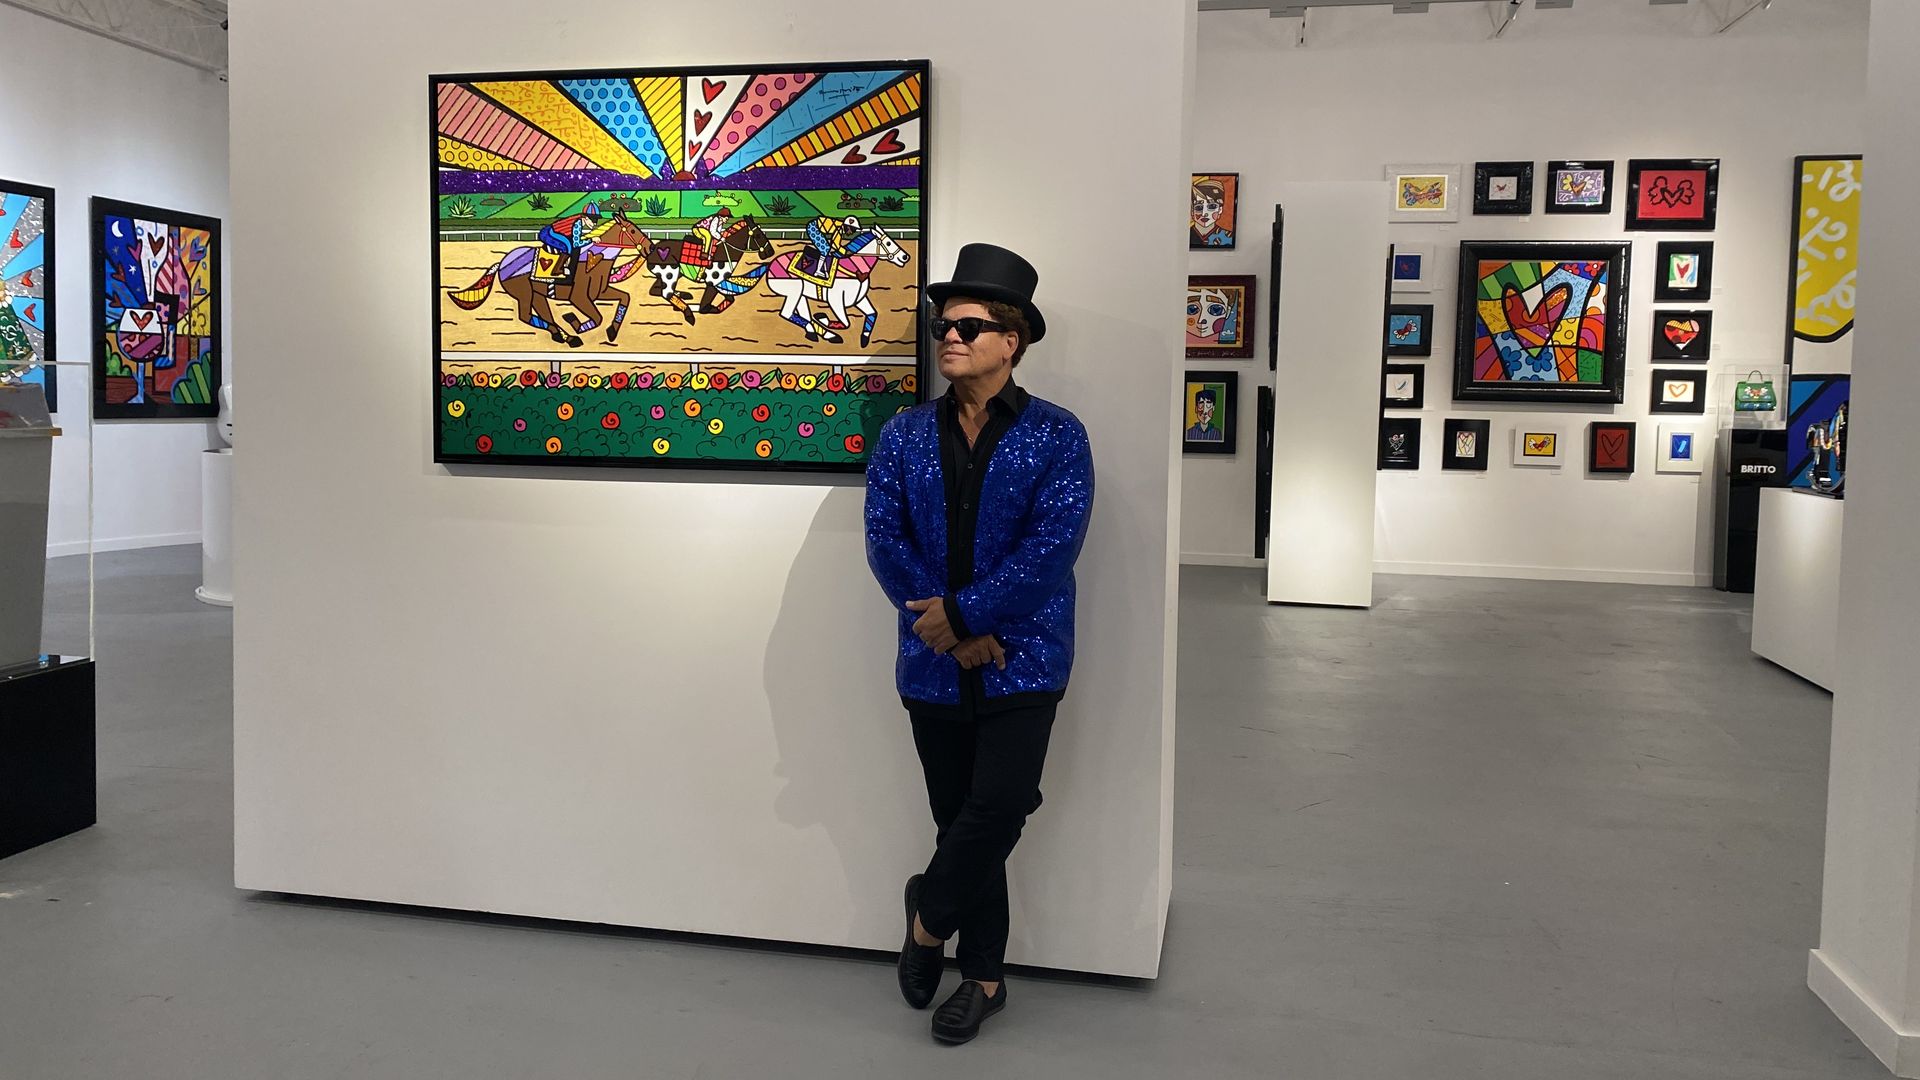 Romero Britto wears a blcak top hat and glittery blue jacket as he stands next to a painting. 